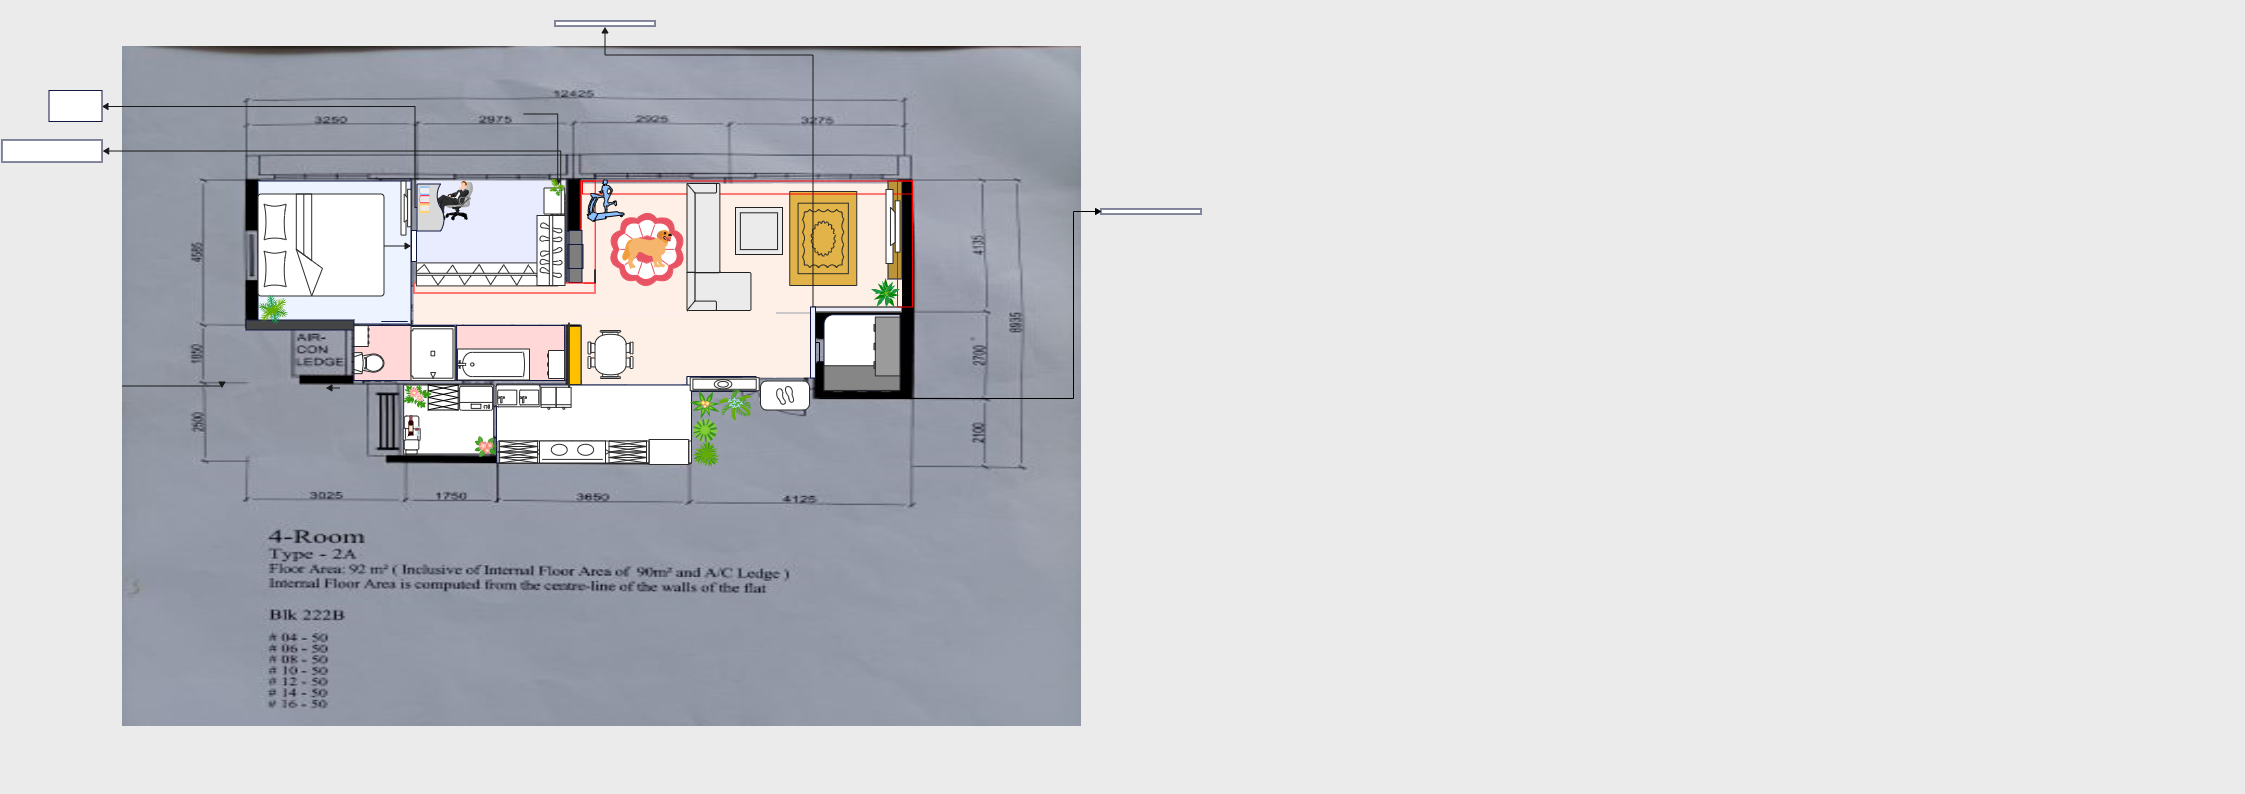 Here's a floor layout of the first floor of my flat. Floor plans are one such tool that, in the form of a scale drawing, connects physical aspects such as rooms, spaces, and entities such as furniture. In a nutshell, it is an architectural representation 